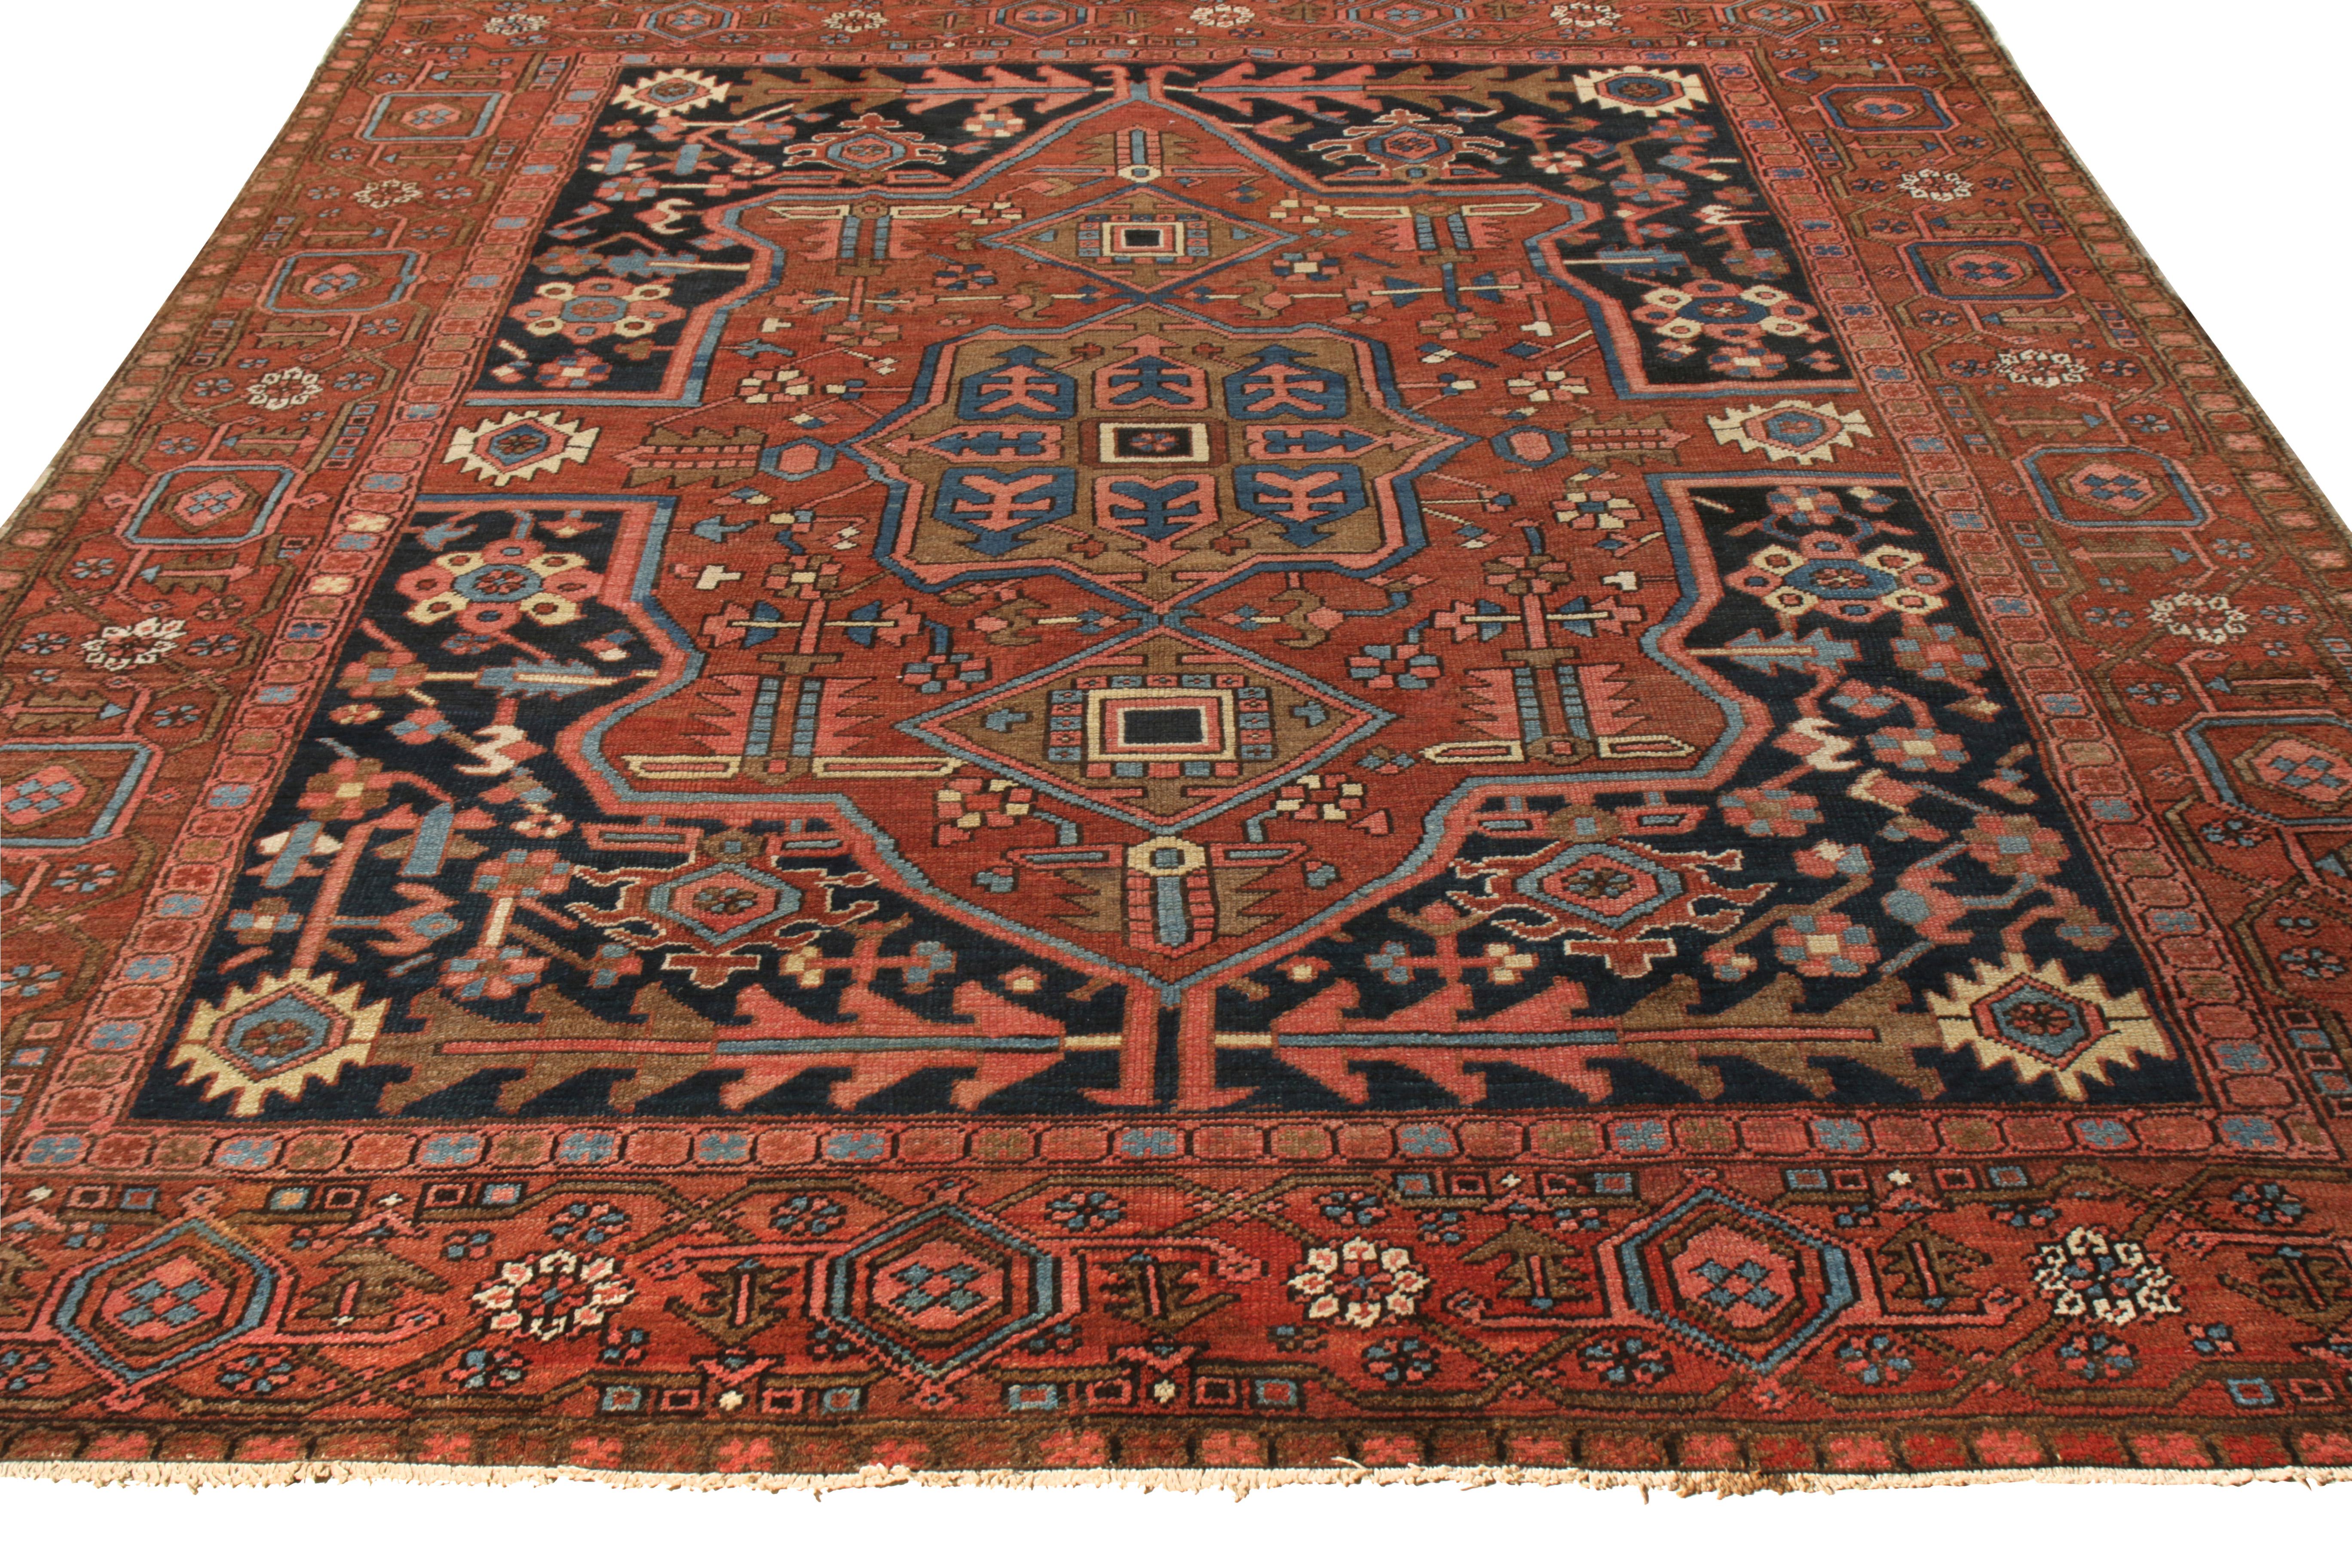 Covering a gracious 10x12 scale, a hand knotted wool antique Serapi rug originating from Persia circa 1920-1930, making way to Rug & Kilim’s acclaimed Antique & Vintage collection. Donning the most celebrated traits of this style, the drawing